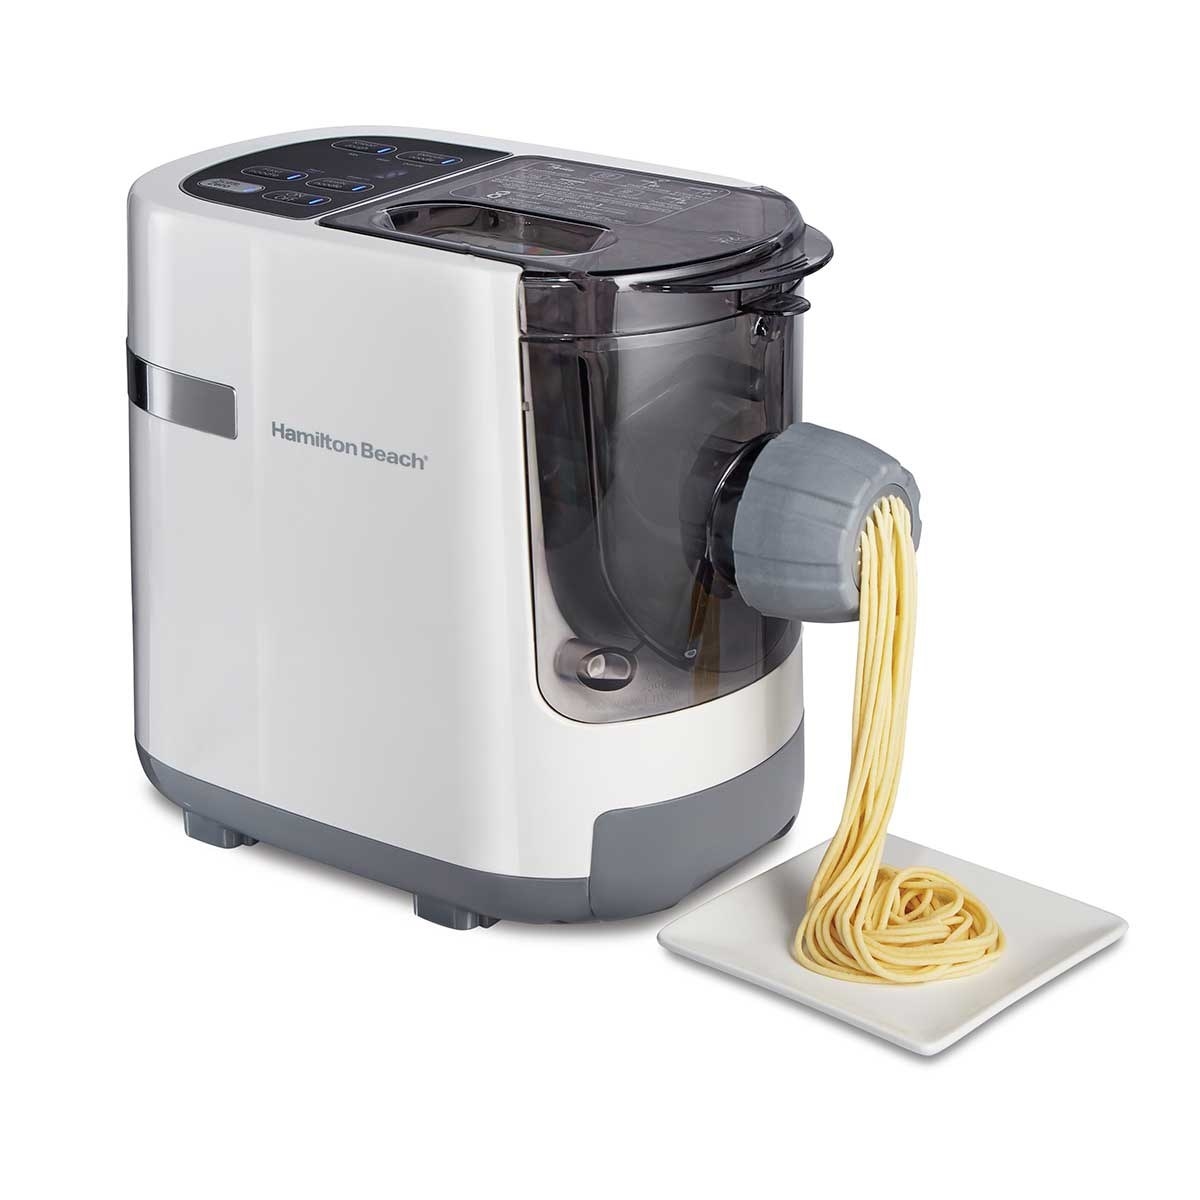 the grey machine with pasta extruding